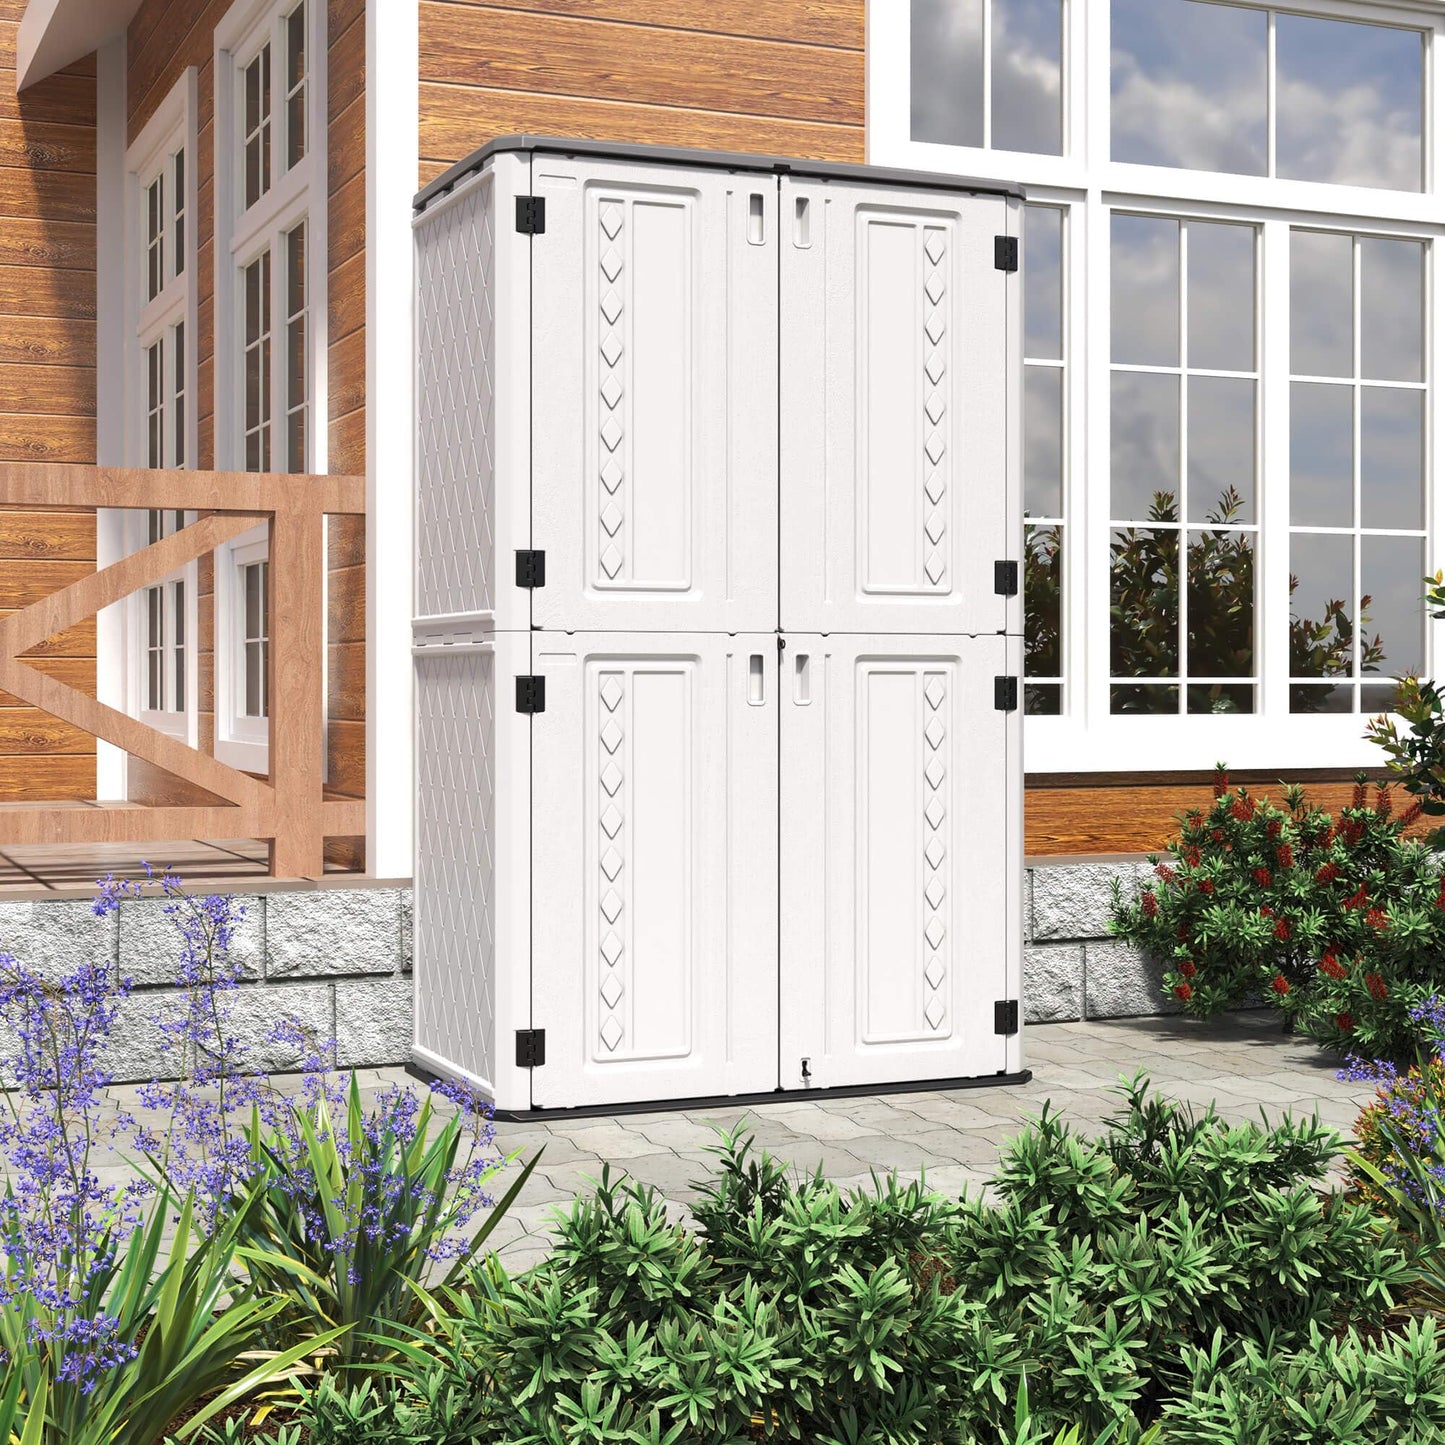 HOMSPARK Outdoor Storage Shed, 53 Cu.ft Outdoor Storage Cabinet with Lockable Doors, Double Layer Resin Vertical Storage shed for Garden, Patio, Backyard, 4×2.5×6.6 FT Grey roof,white wall,Black floor